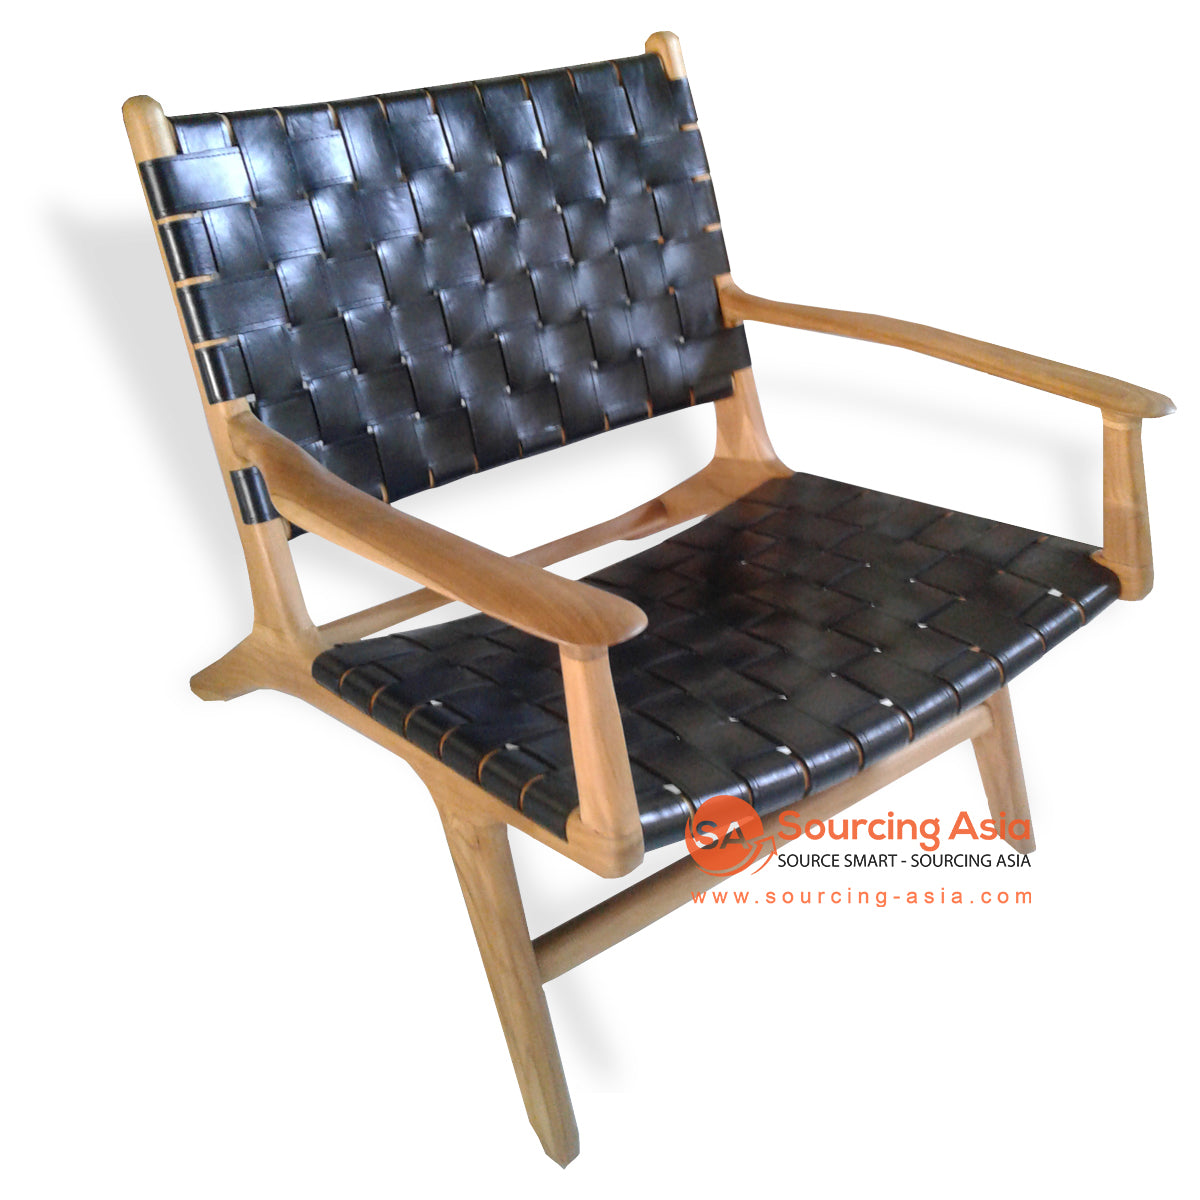 KUSJ002-C4 BLACK WOVEN LEATHER AND NATURAL TEAK WOOD MARLBORO ARMED LAZY CHAIR